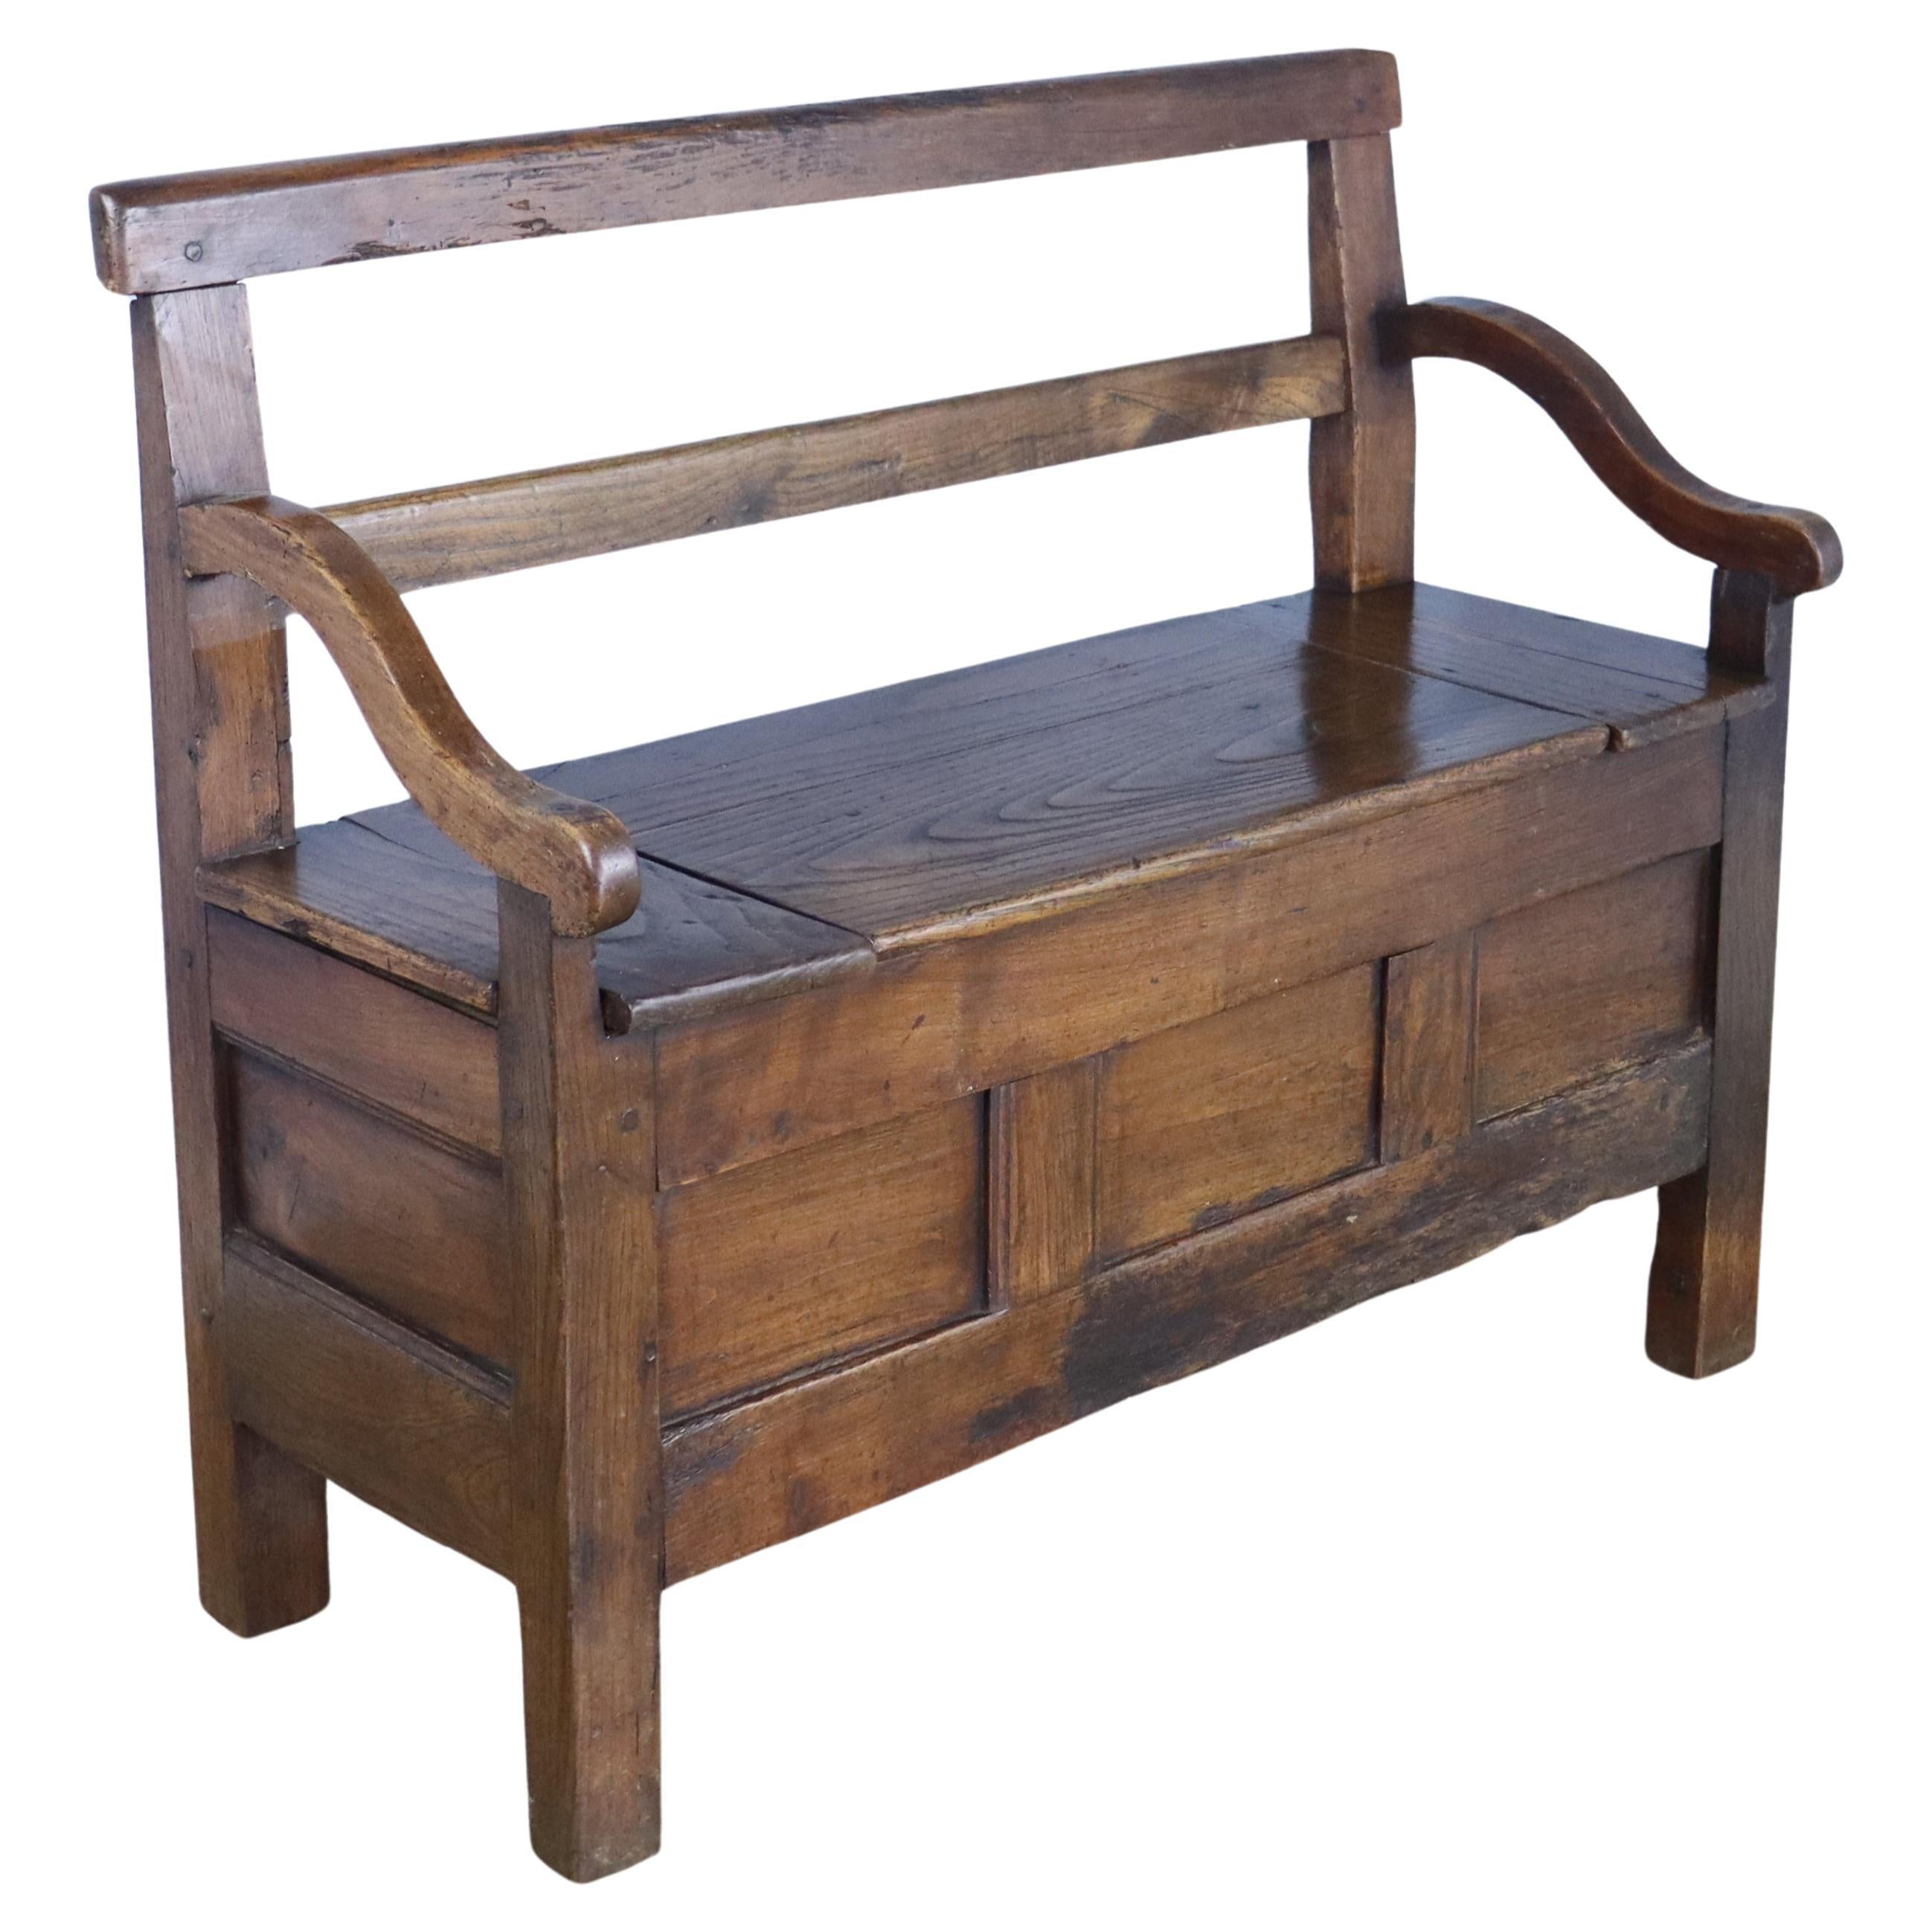 French Chestnut Seat with Lift Lid and Graceful Arms